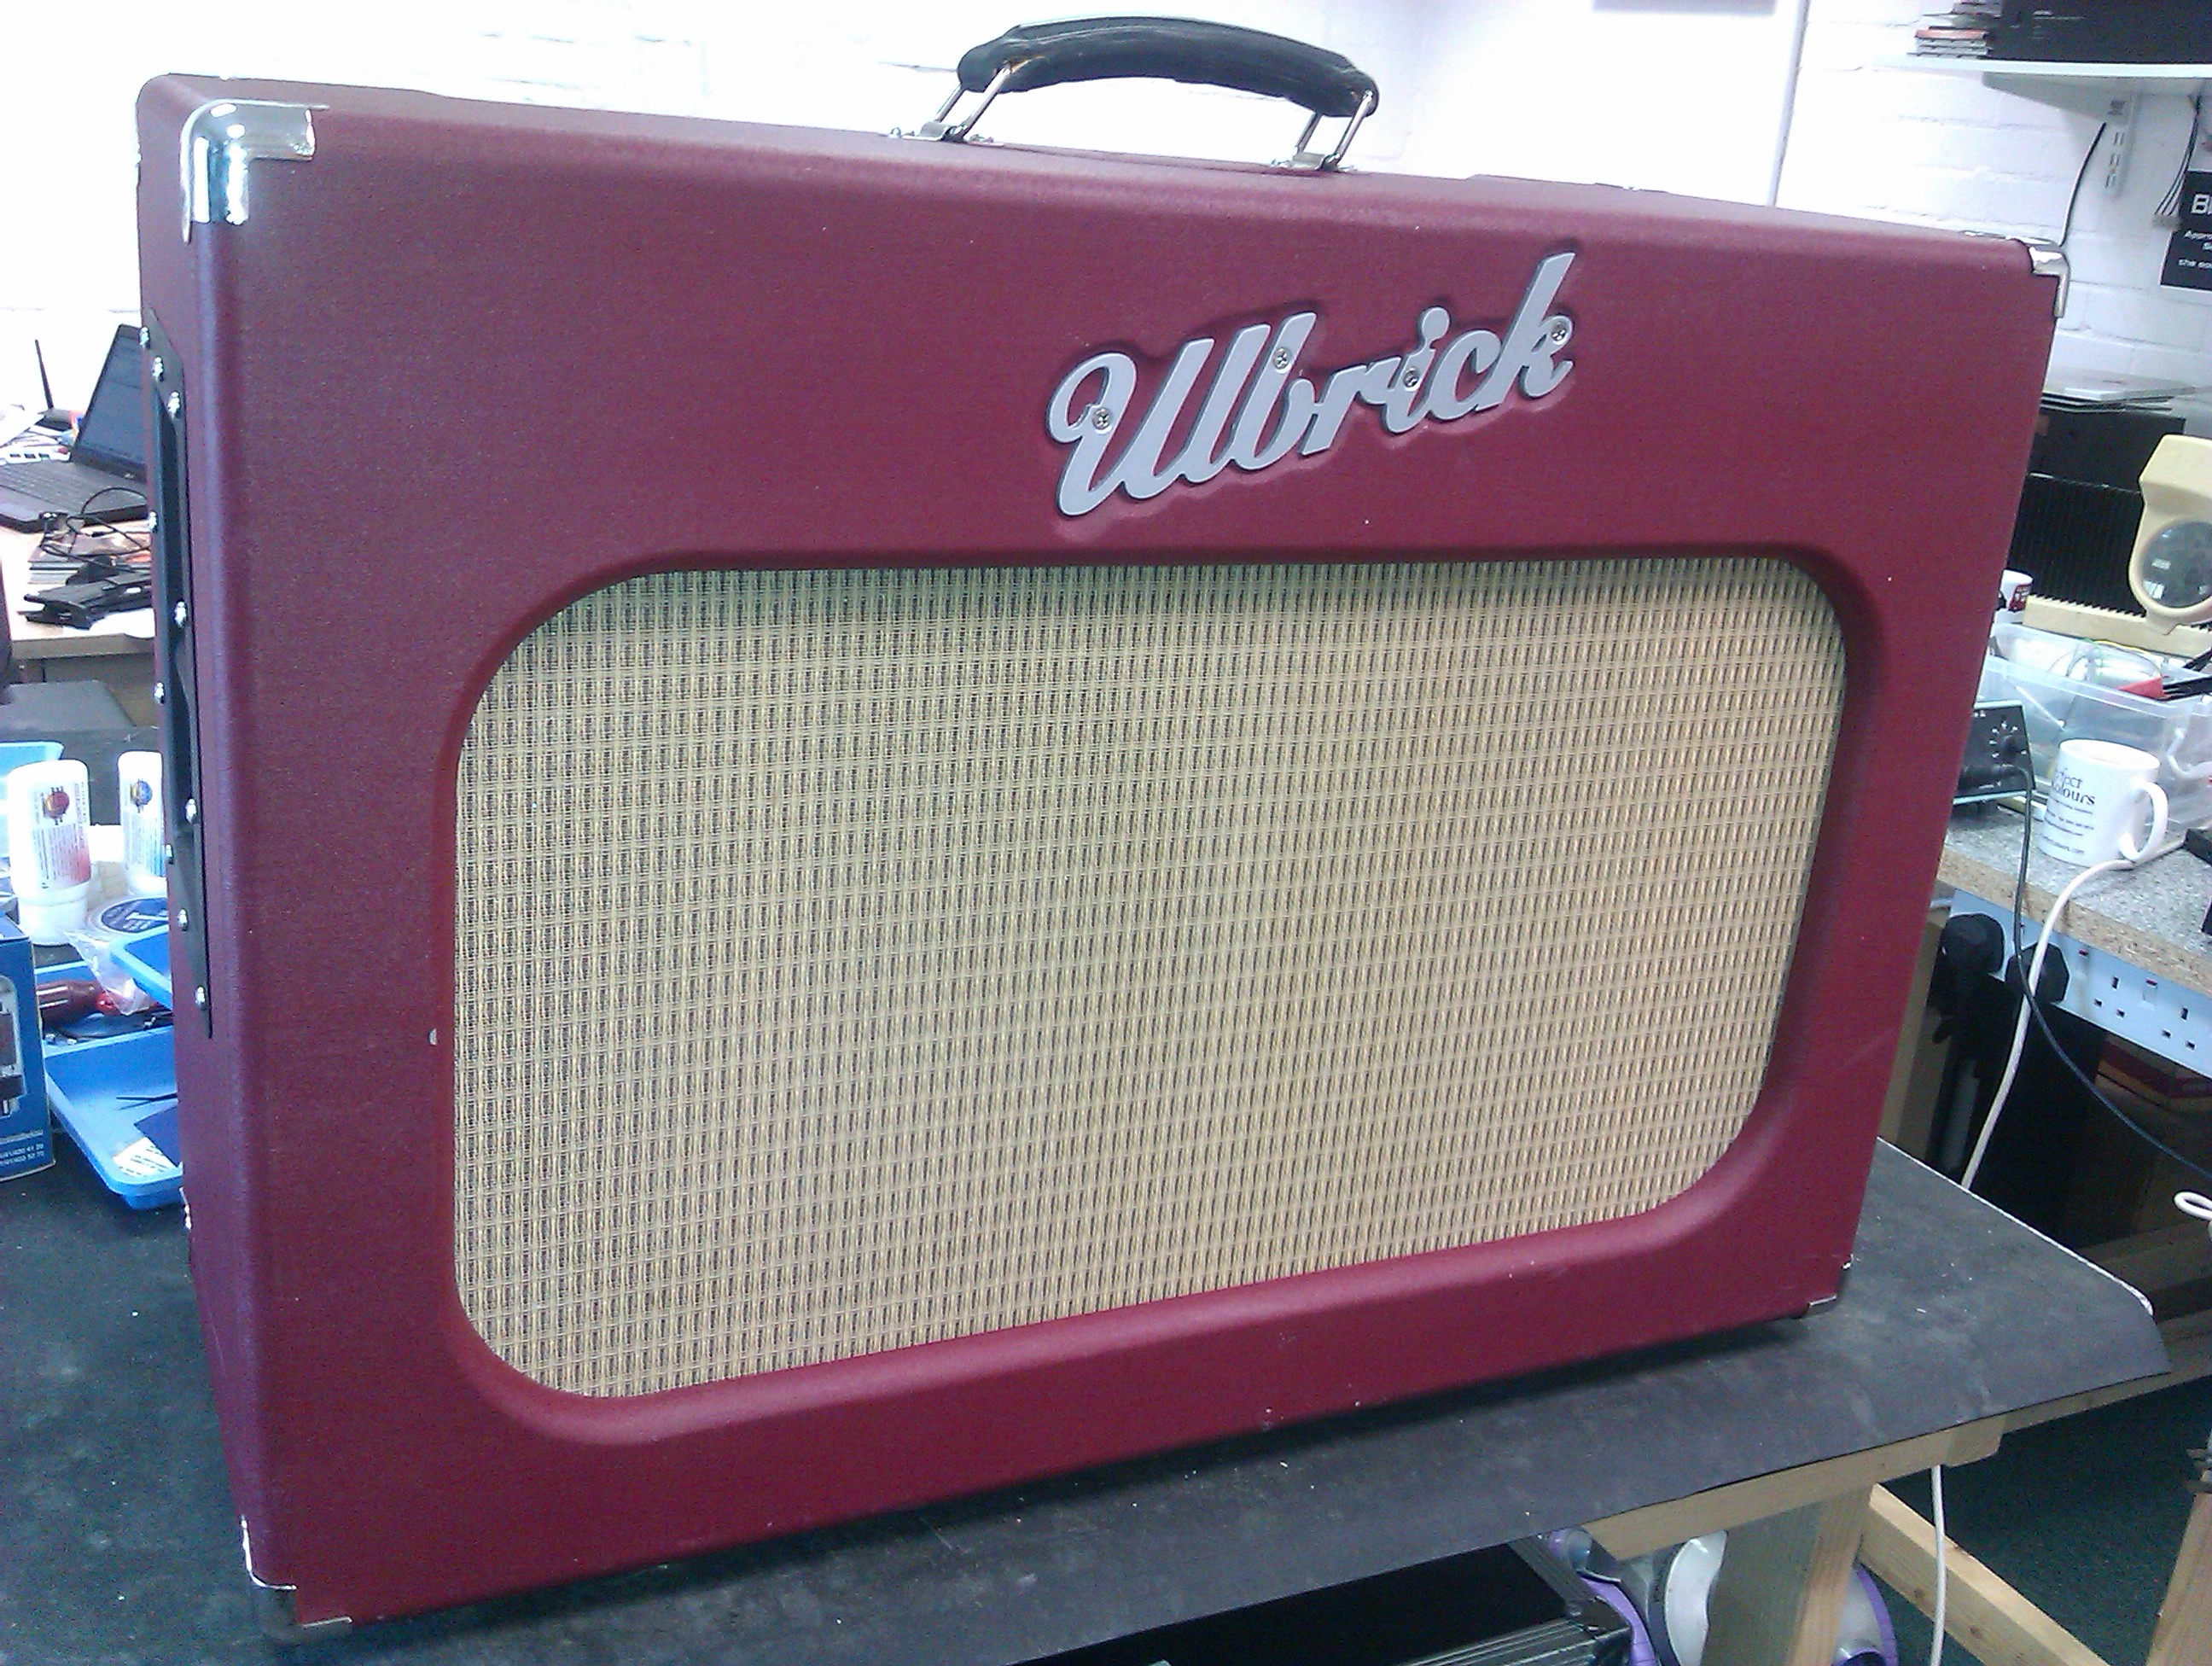 Ulbrick 80W combo amp - EL34 powered screamer from down under